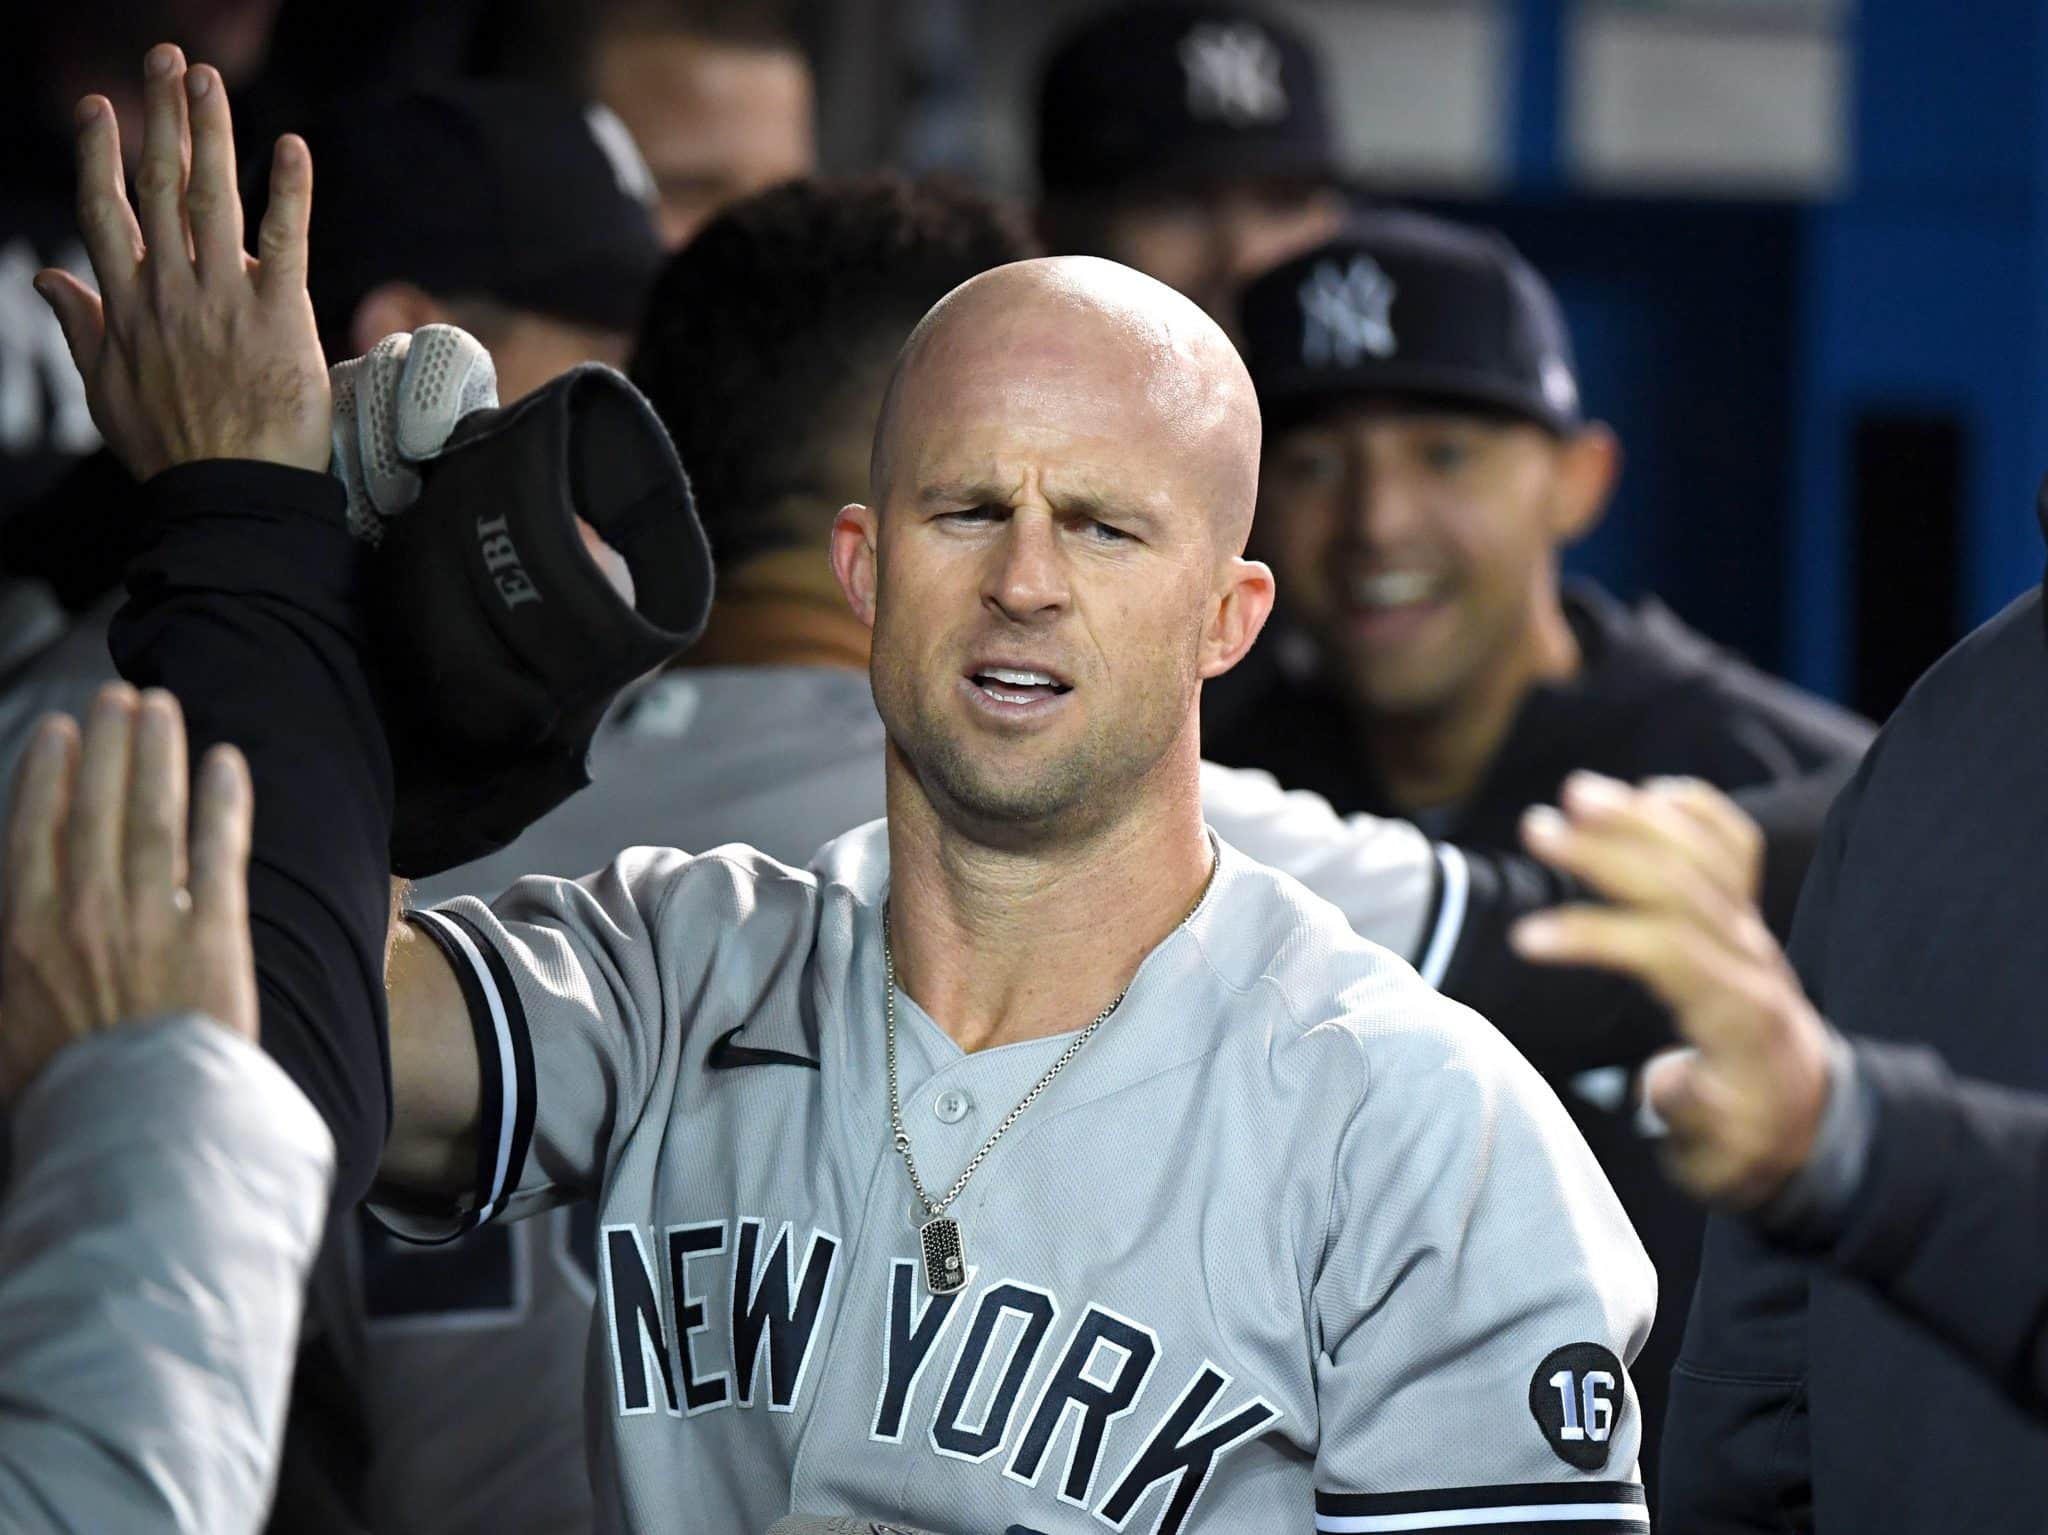 A reminder that Brett Gardner's Yankees playing days are done